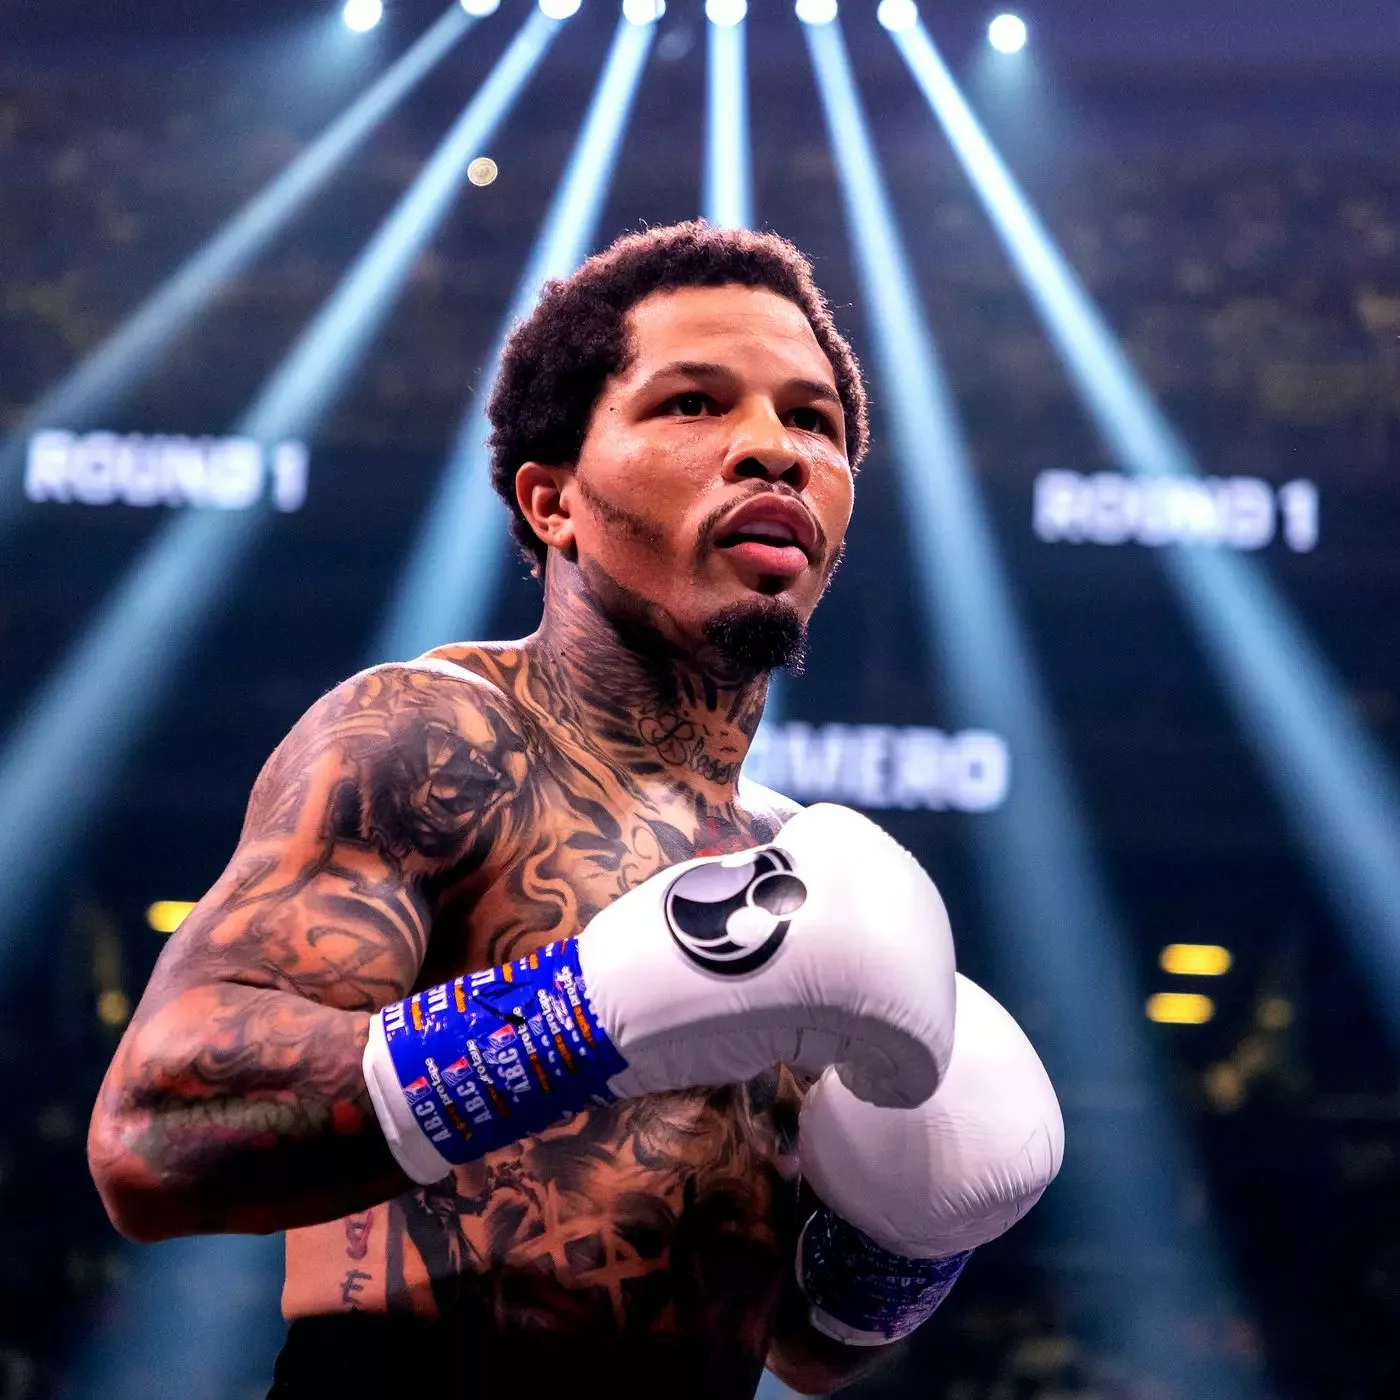 GERVONTA DAVIS SAYS HE’S INNOCENT, CLAIMS THE ALLEGED VICTIM WAS OFFERED $50K TO PRESS CHARGES